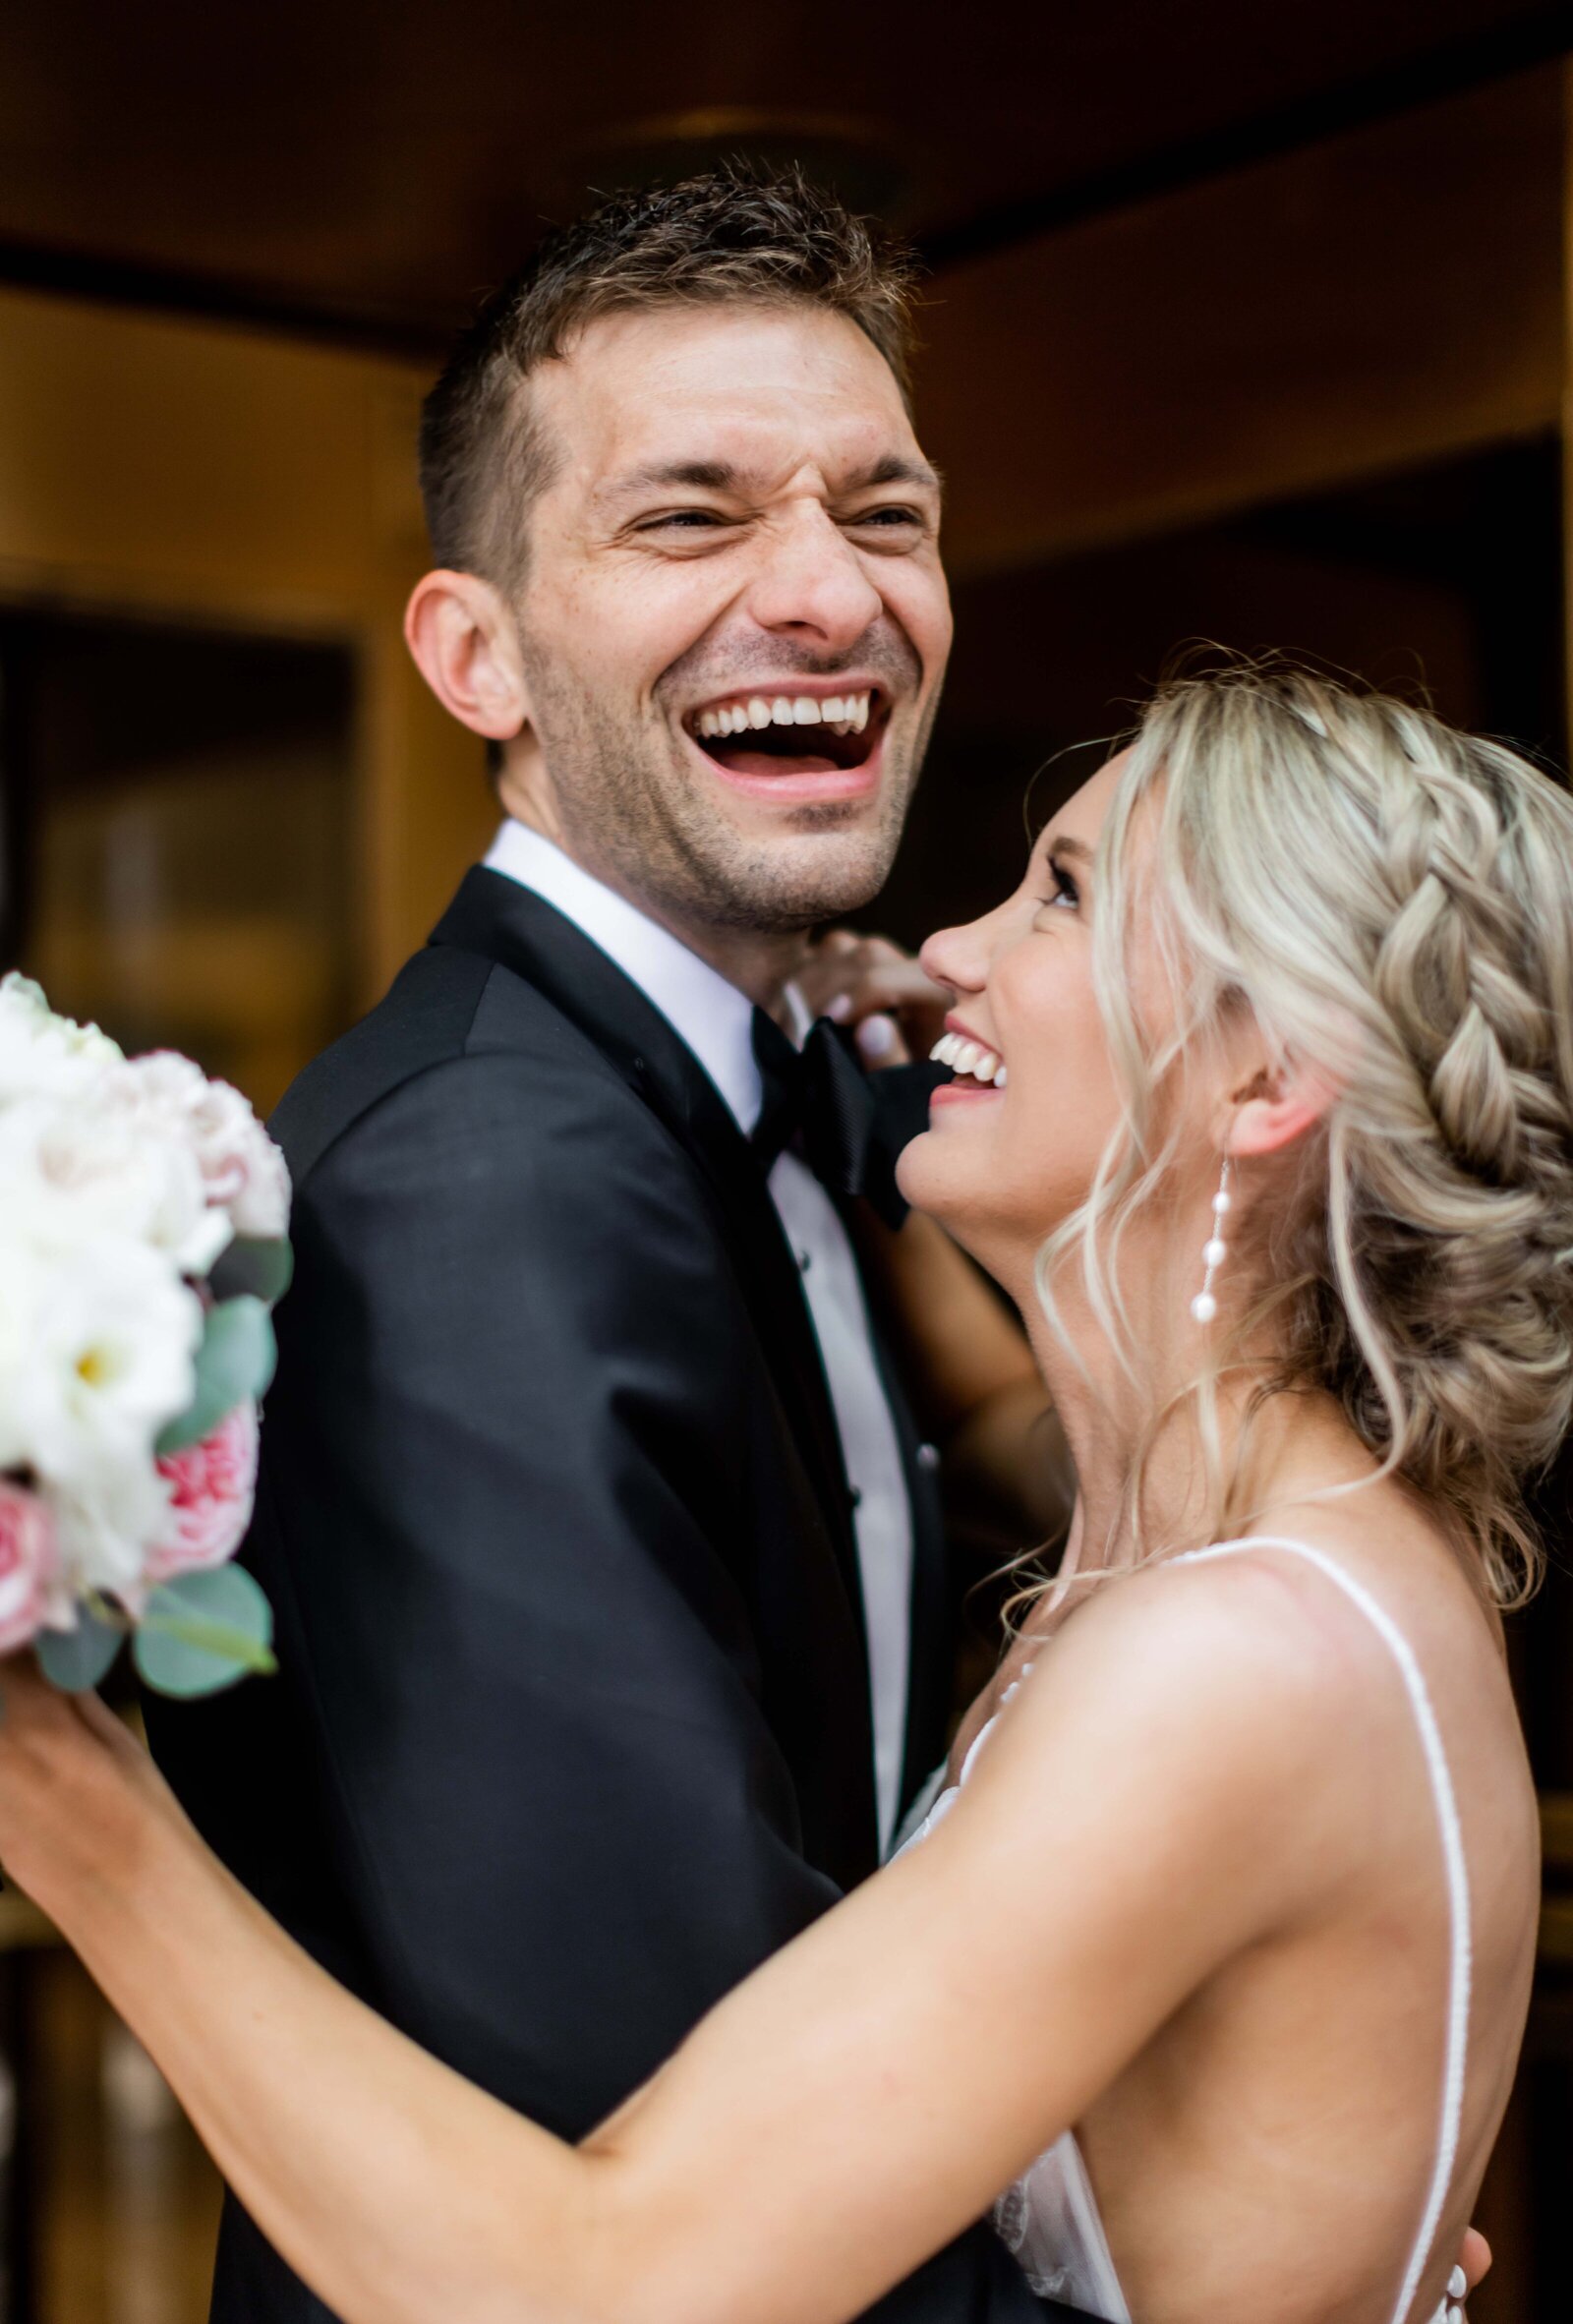 Capture the essence of pure joy in this vibrant photo of Hailey and Peter celebrating their special day at The Renaissance Hotel. Their faces radiate happiness and energy as they share a laugh, perfectly encapsulating the excitement of their wedding day. The grandeur of The Renaissance Hotel adds a touch of elegance to the background, enhancing the festive atmosphere. This image is perfect for couples looking for inspiration on how to create unforgettable, joyful moments on their wedding day, and is ideal for features in bridal magazines, wedding blogs, and social media showcases.